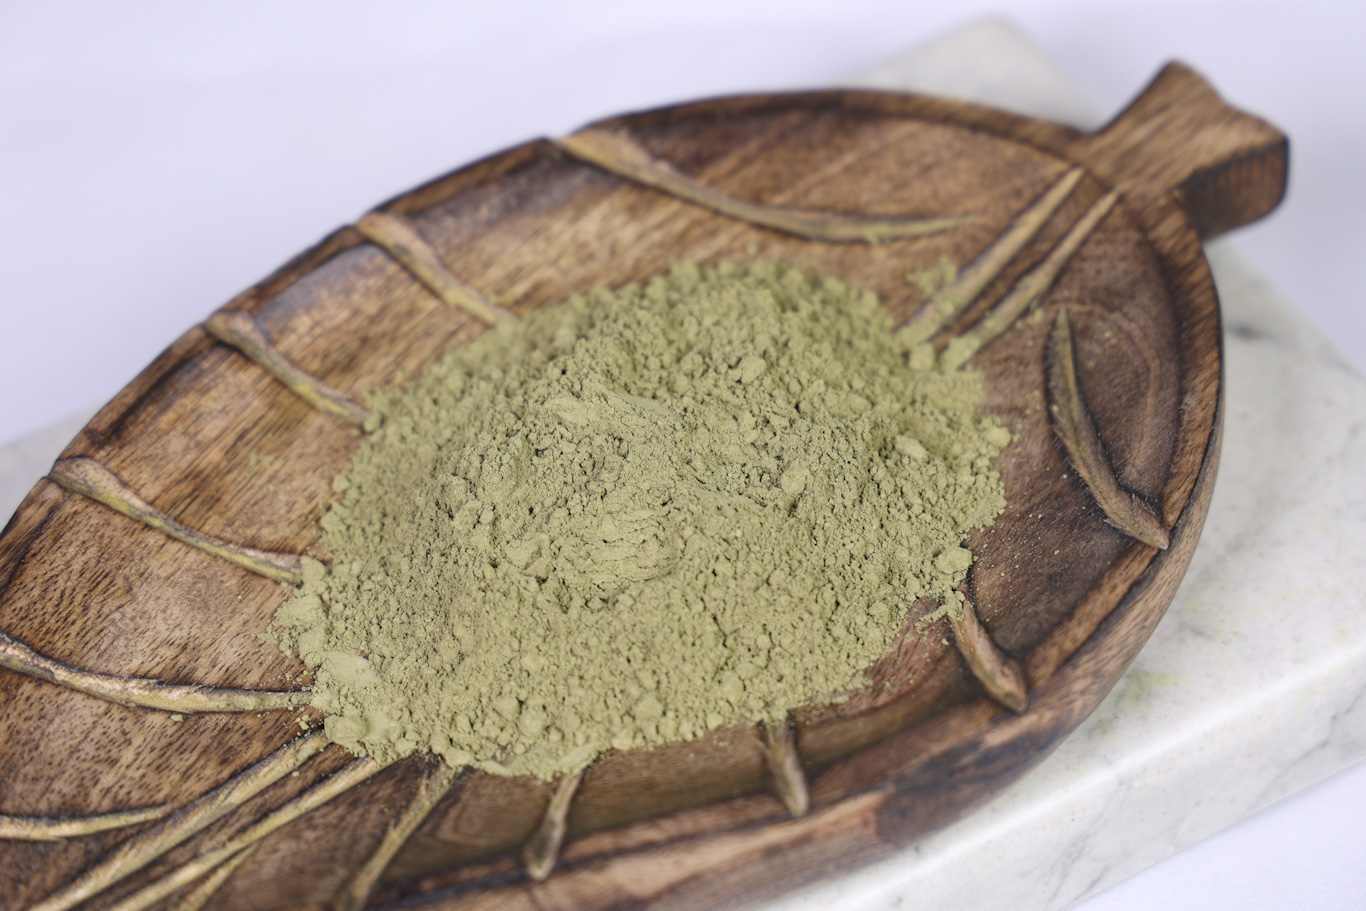 Best Quality Kratom Products